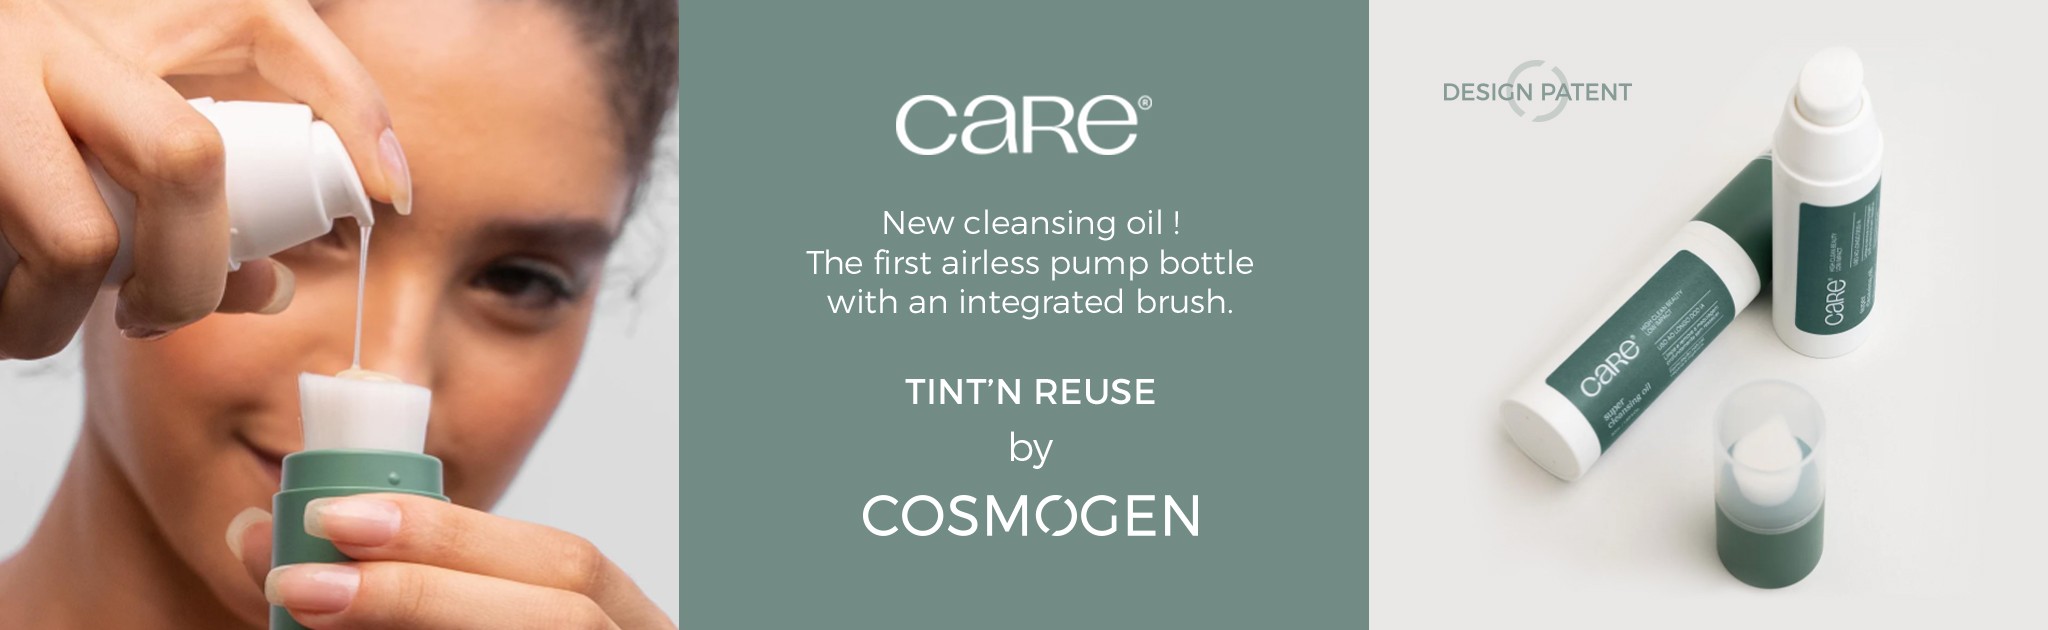 https://www.cosmogen.fr/tint-n-reuse.html?search_query=Tint&results=17&utm_source=sendinblue&utm_campaign=Care%20%20Our%20Tintn%20Reuse%20Airless_FR&utm_medium=email